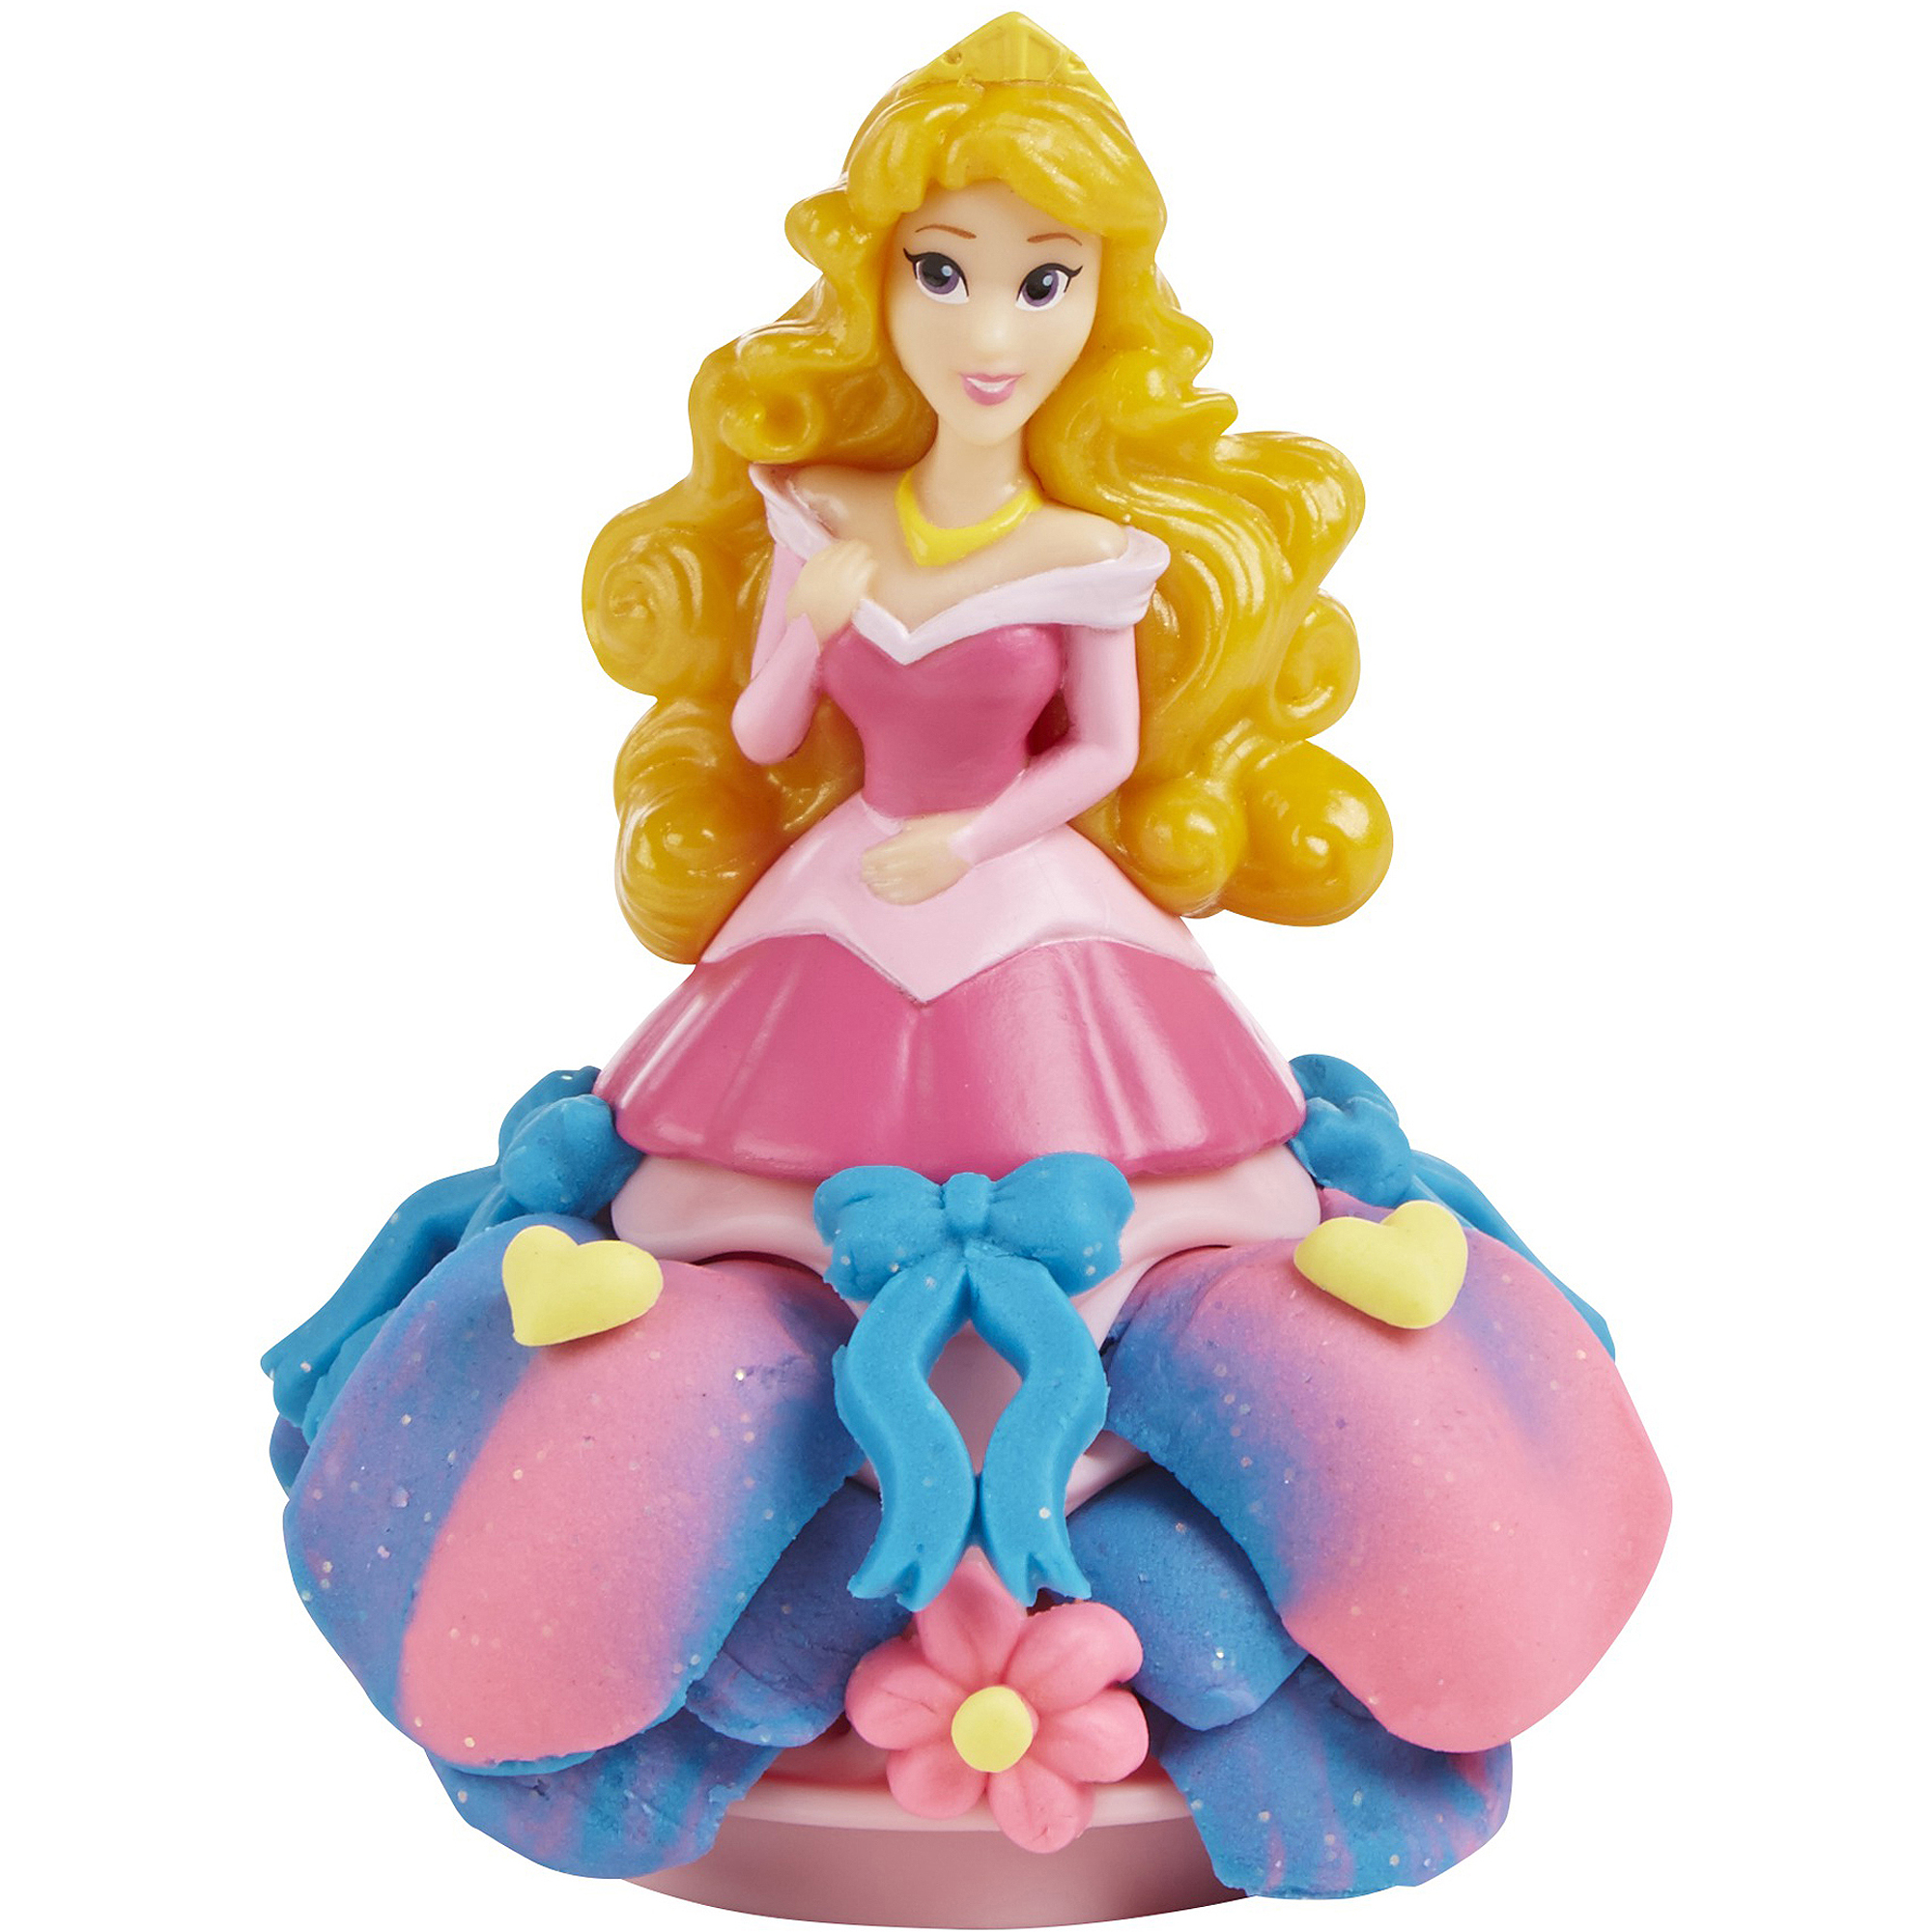 Play-Doh Disney Mix 'N Match Magical Designs Palace Set with Princess Aurora & 4 Cans of Sparkle Play-Doh - image 3 of 13